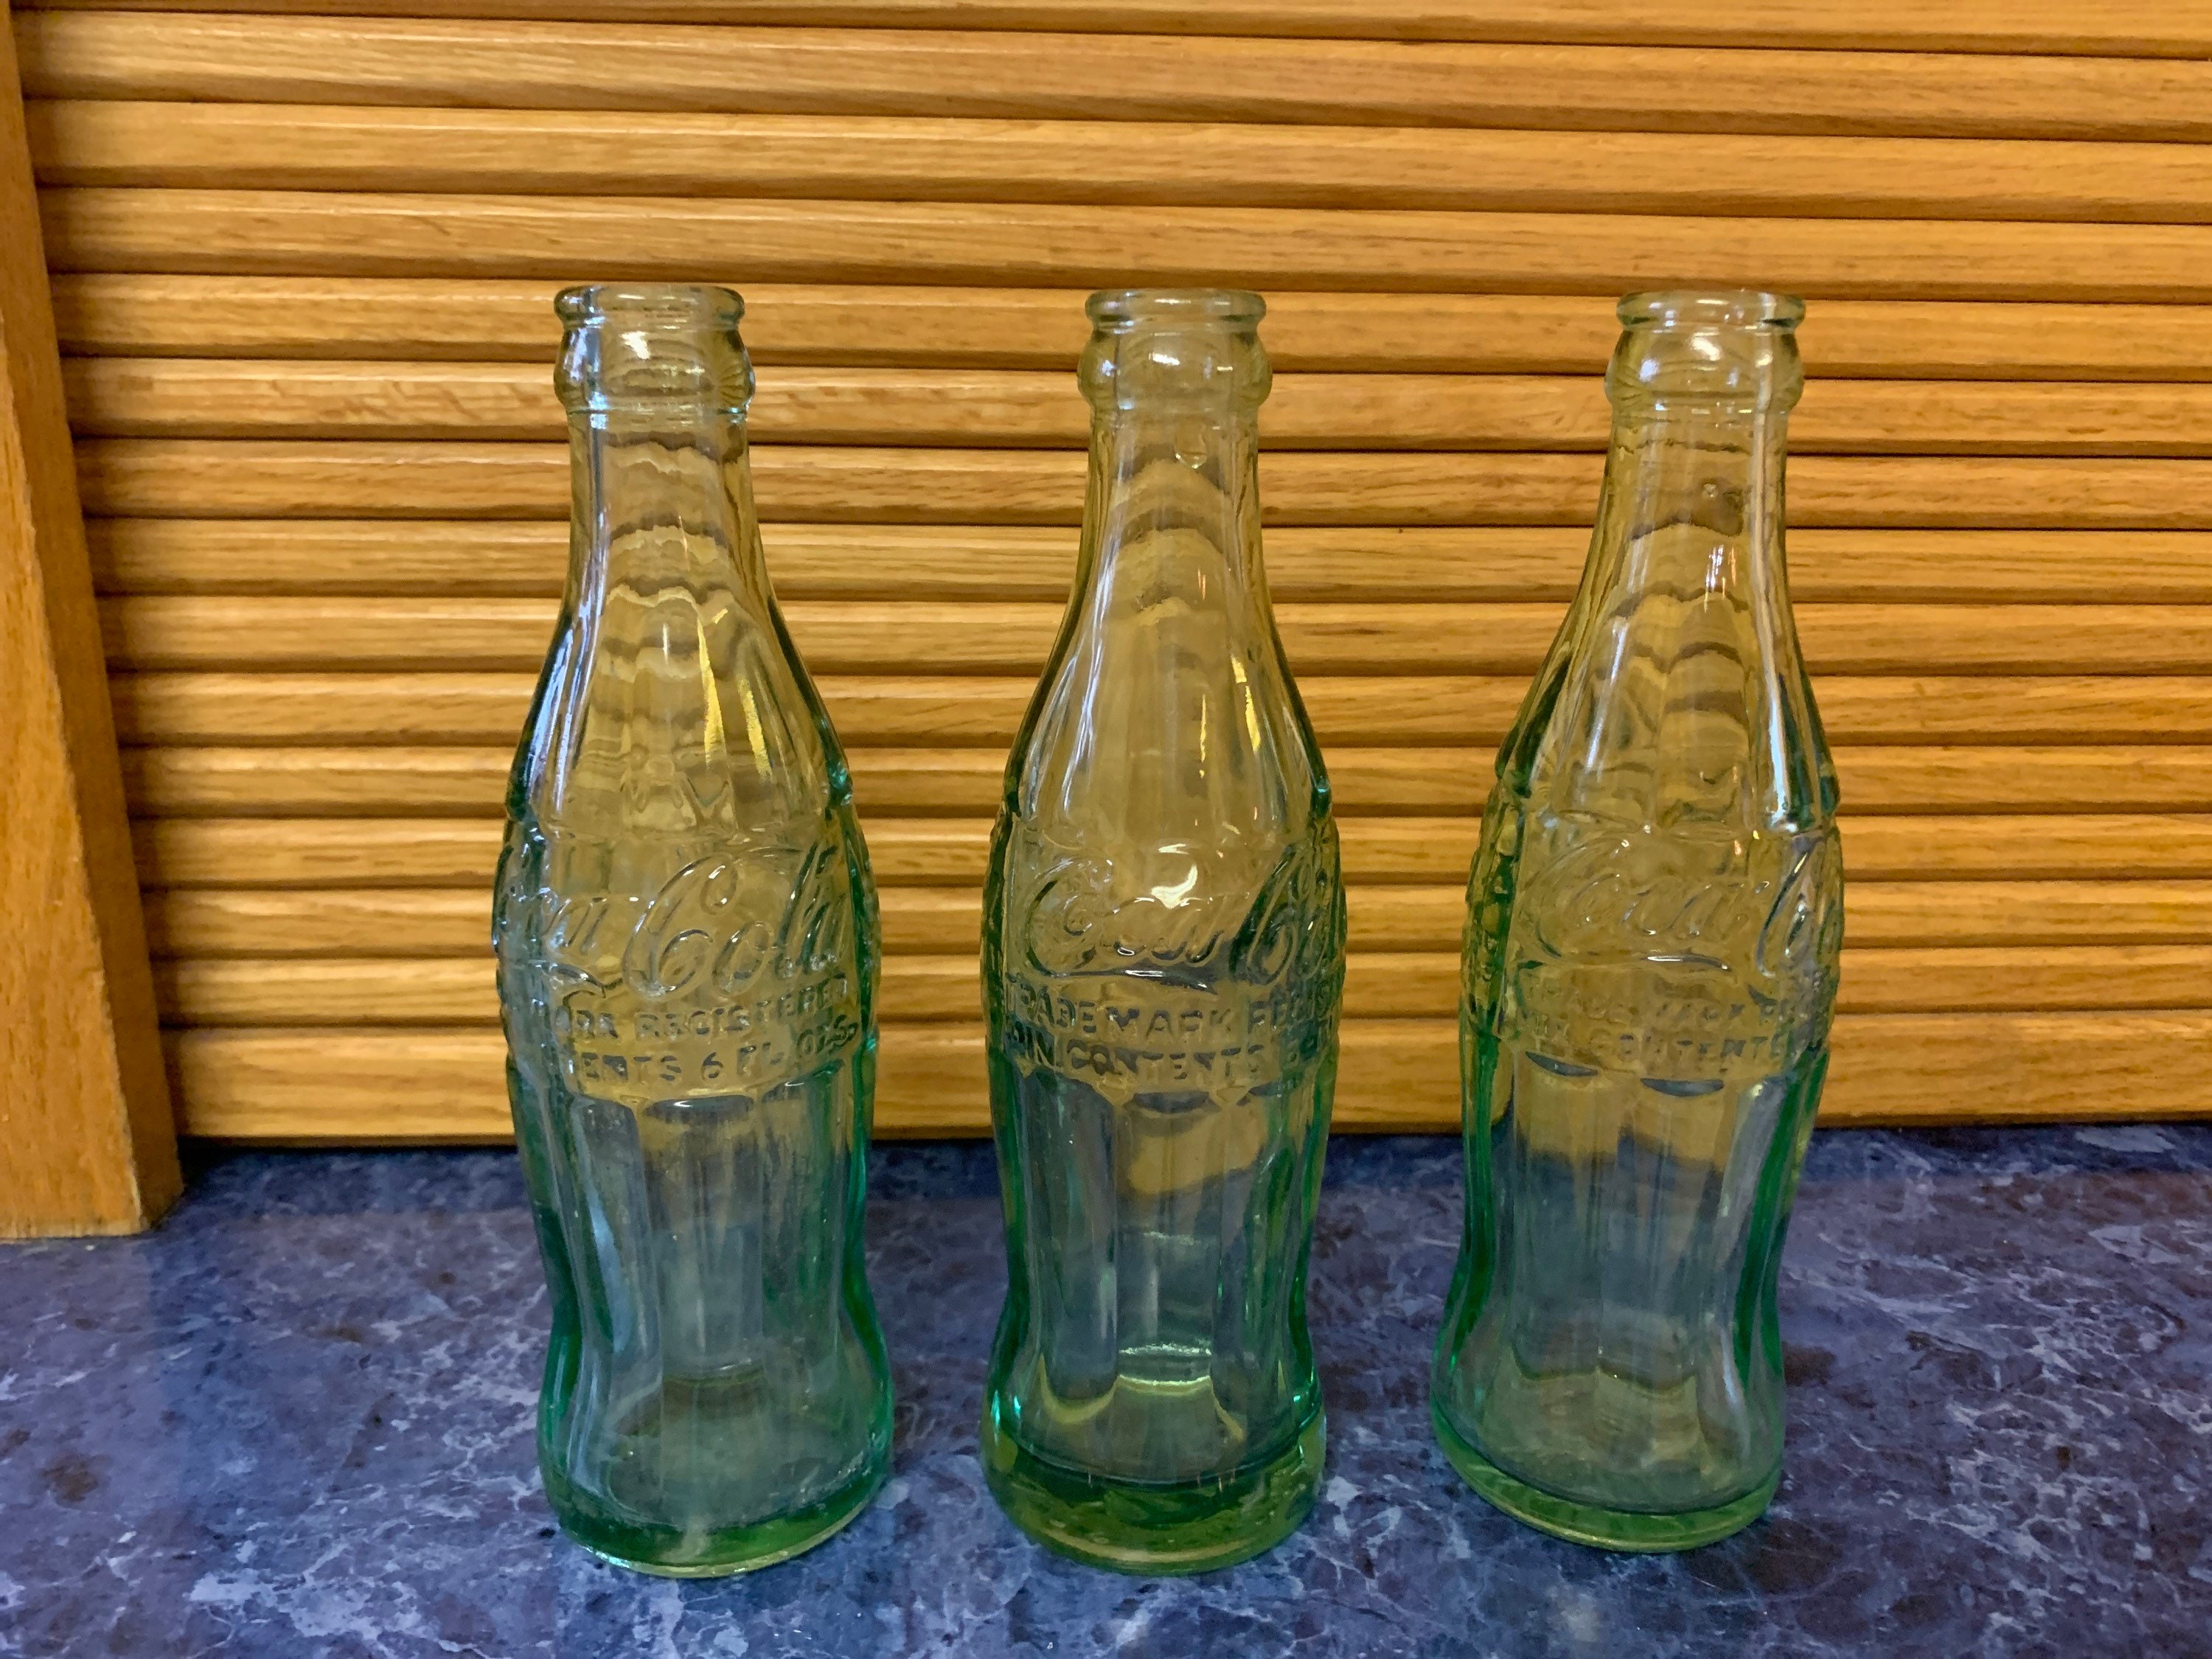 Gourde isotherme Coca Cola 50 cl 2/3 1949